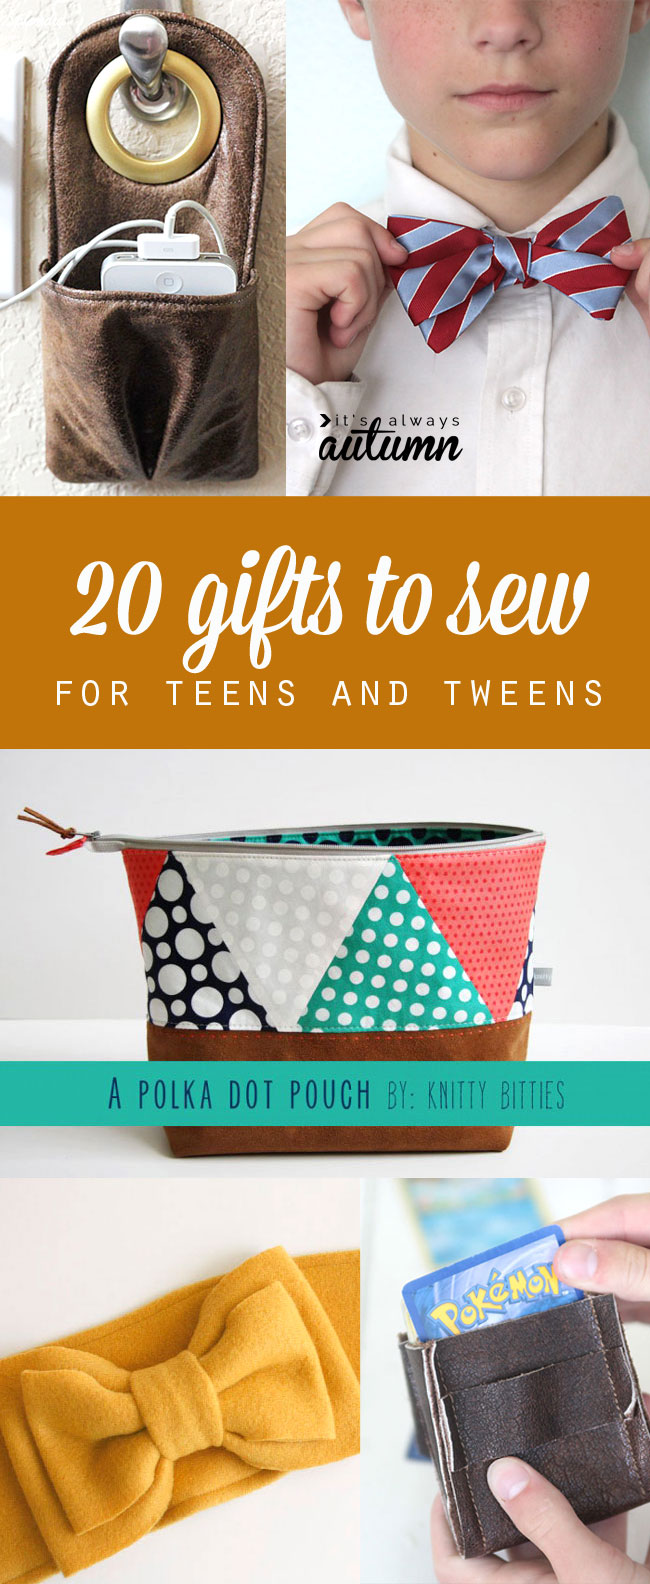 20 gifts to sew for teens and tweens - great tutorials for gifts you can make that they'll actually like! lots of ideas for boys & girls!